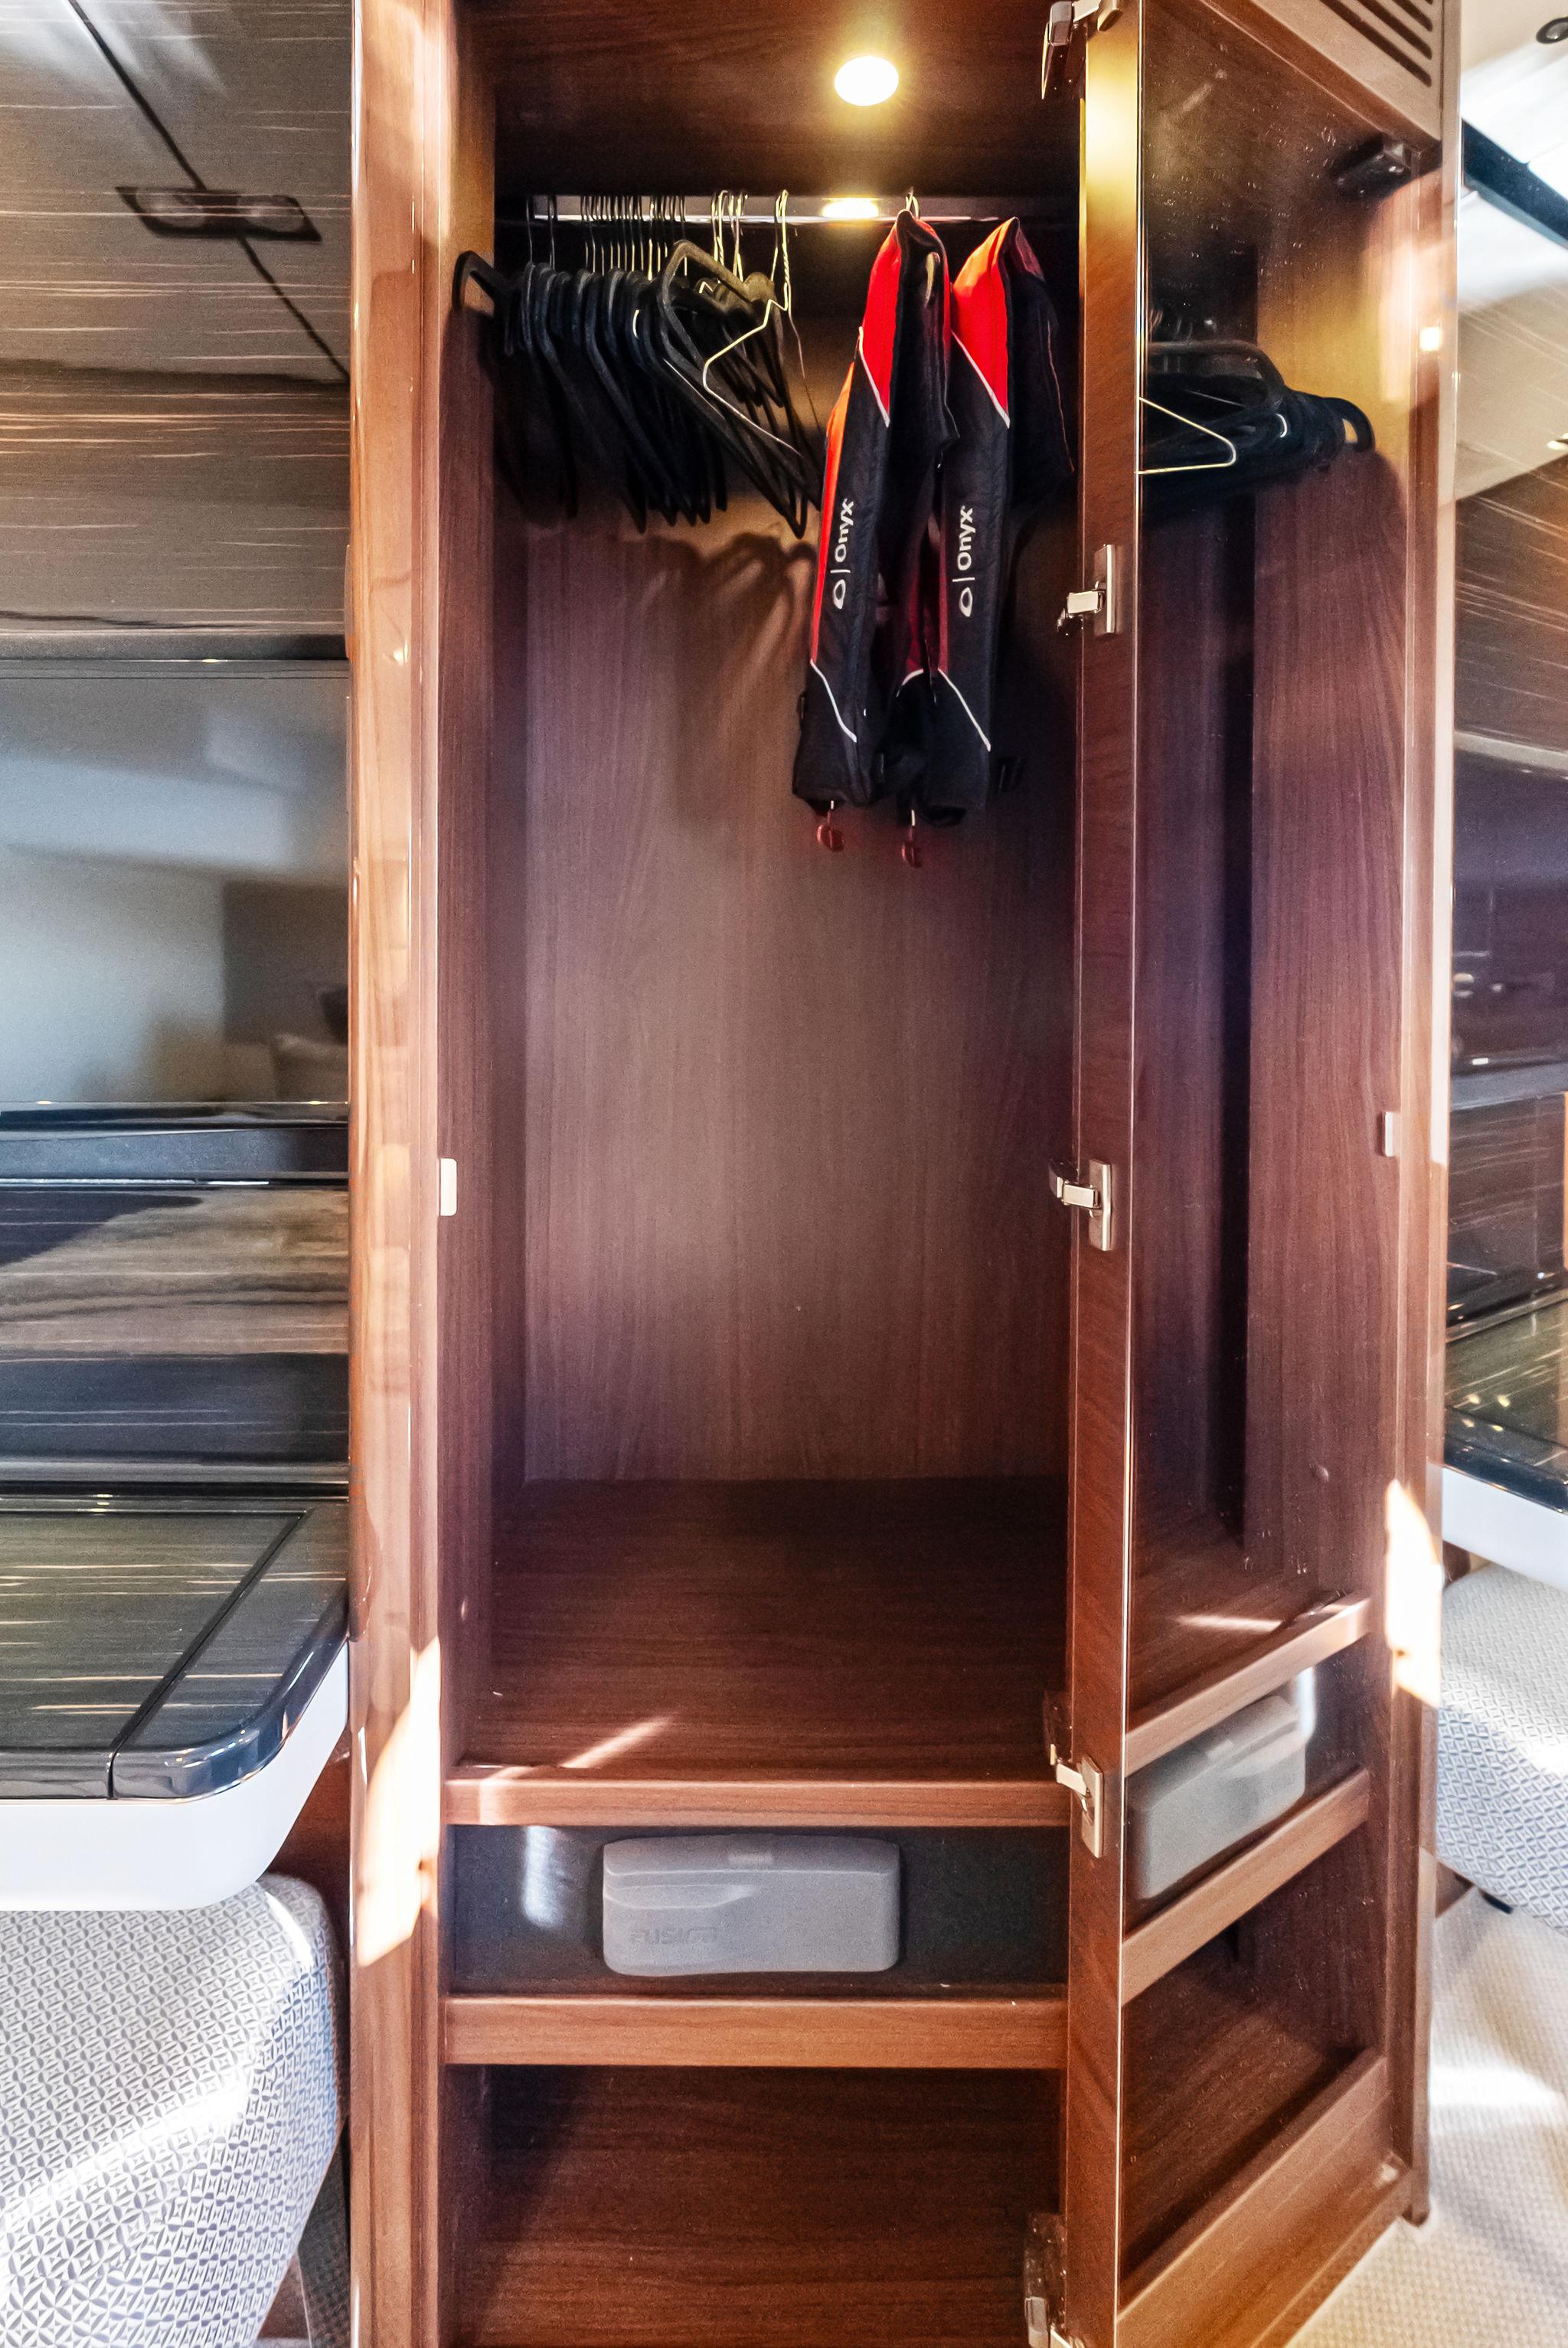 Starboard Guest Stateroom Closet